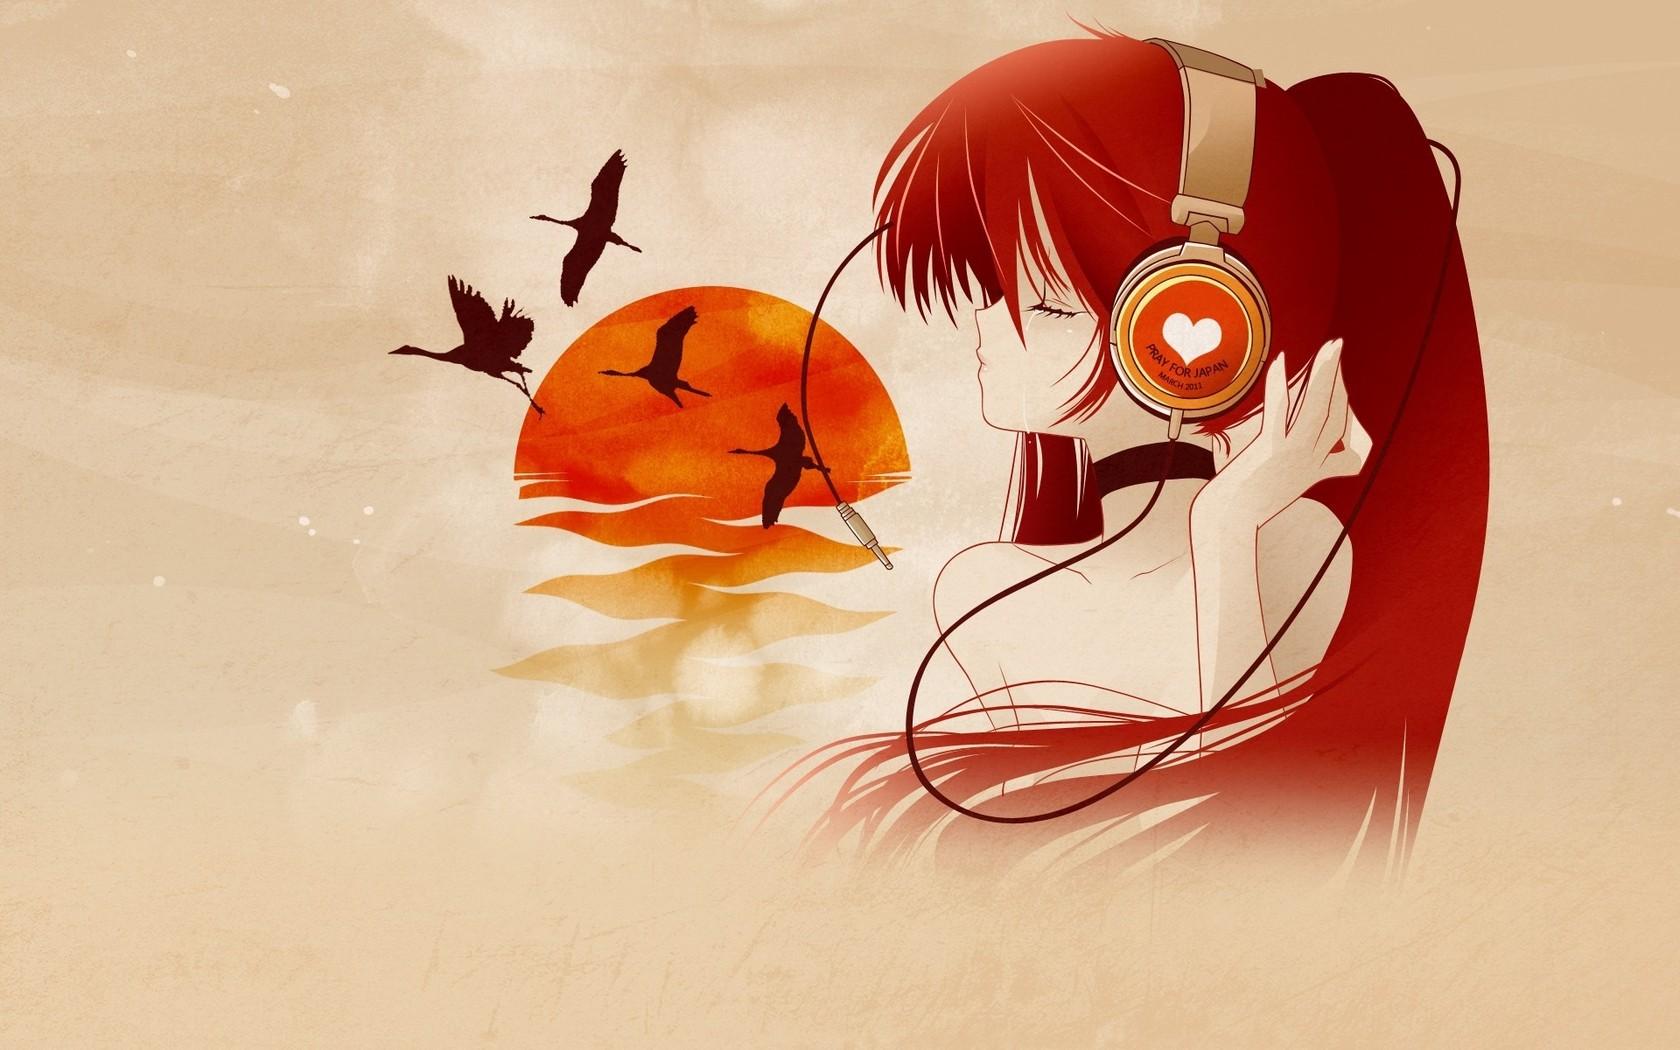 Anime Red Hair Girl With Headphones wallpaper